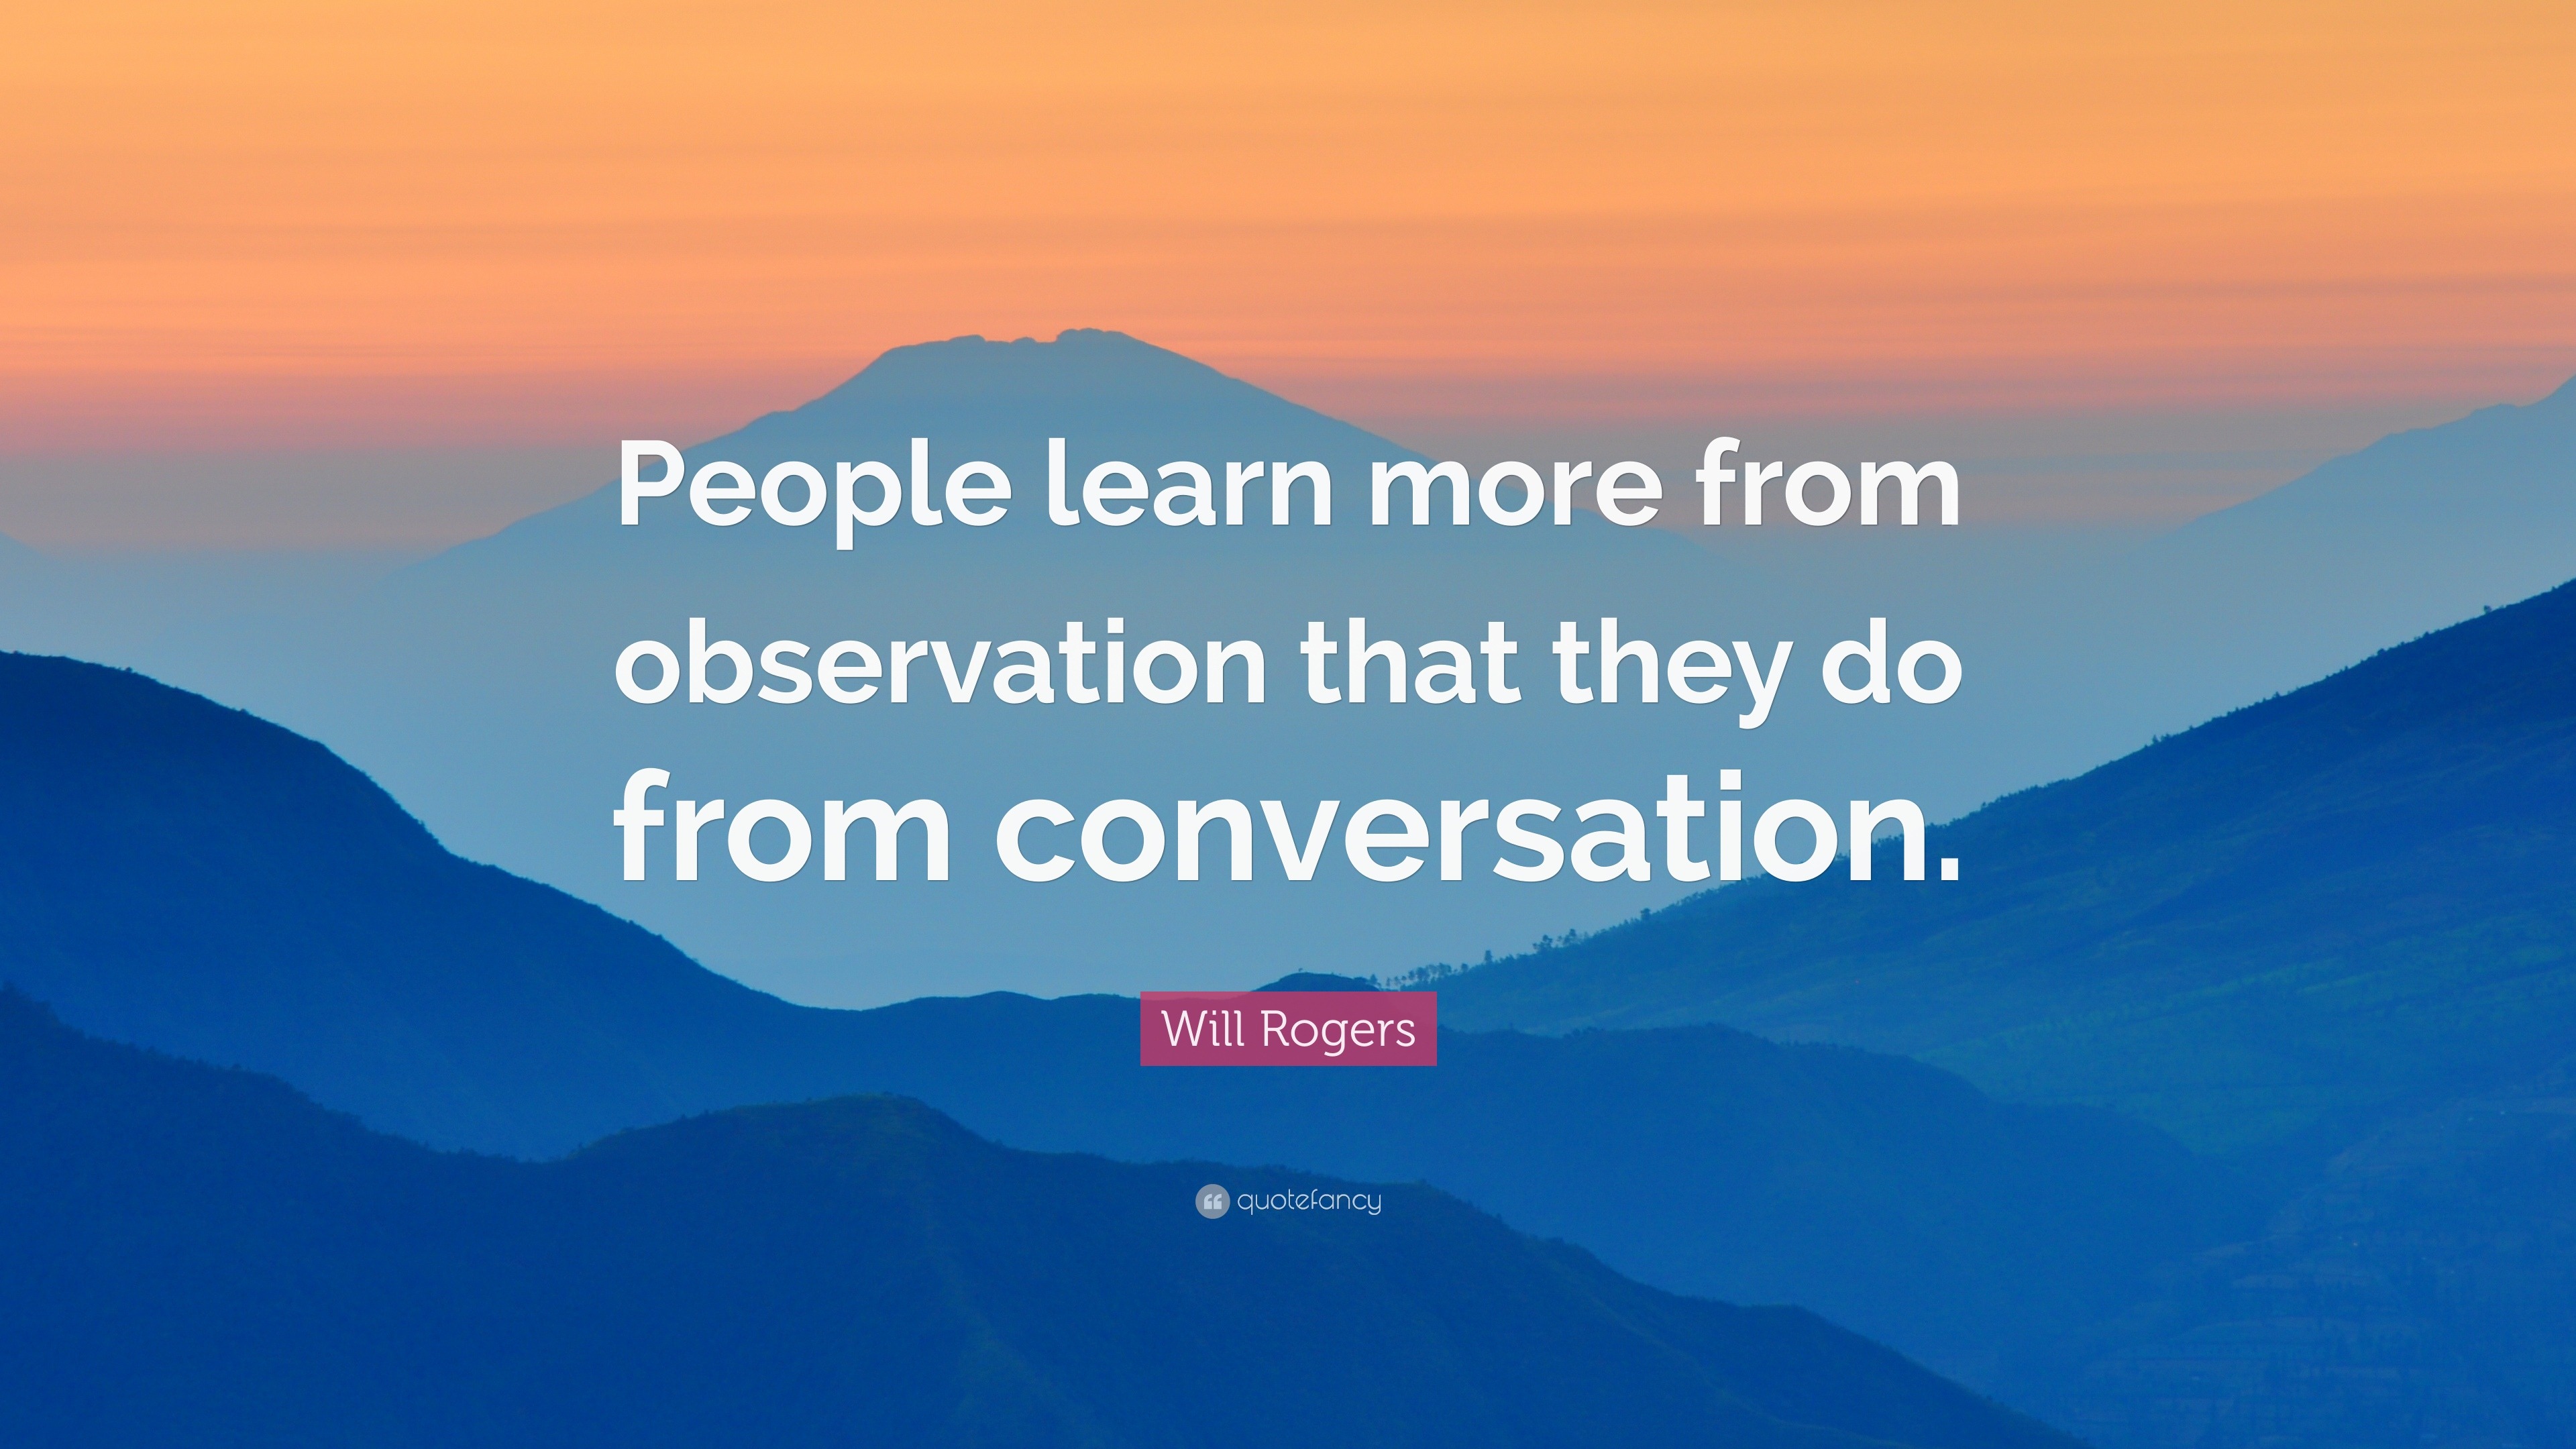 Will Rogers Quote: “People learn more from observation that they do